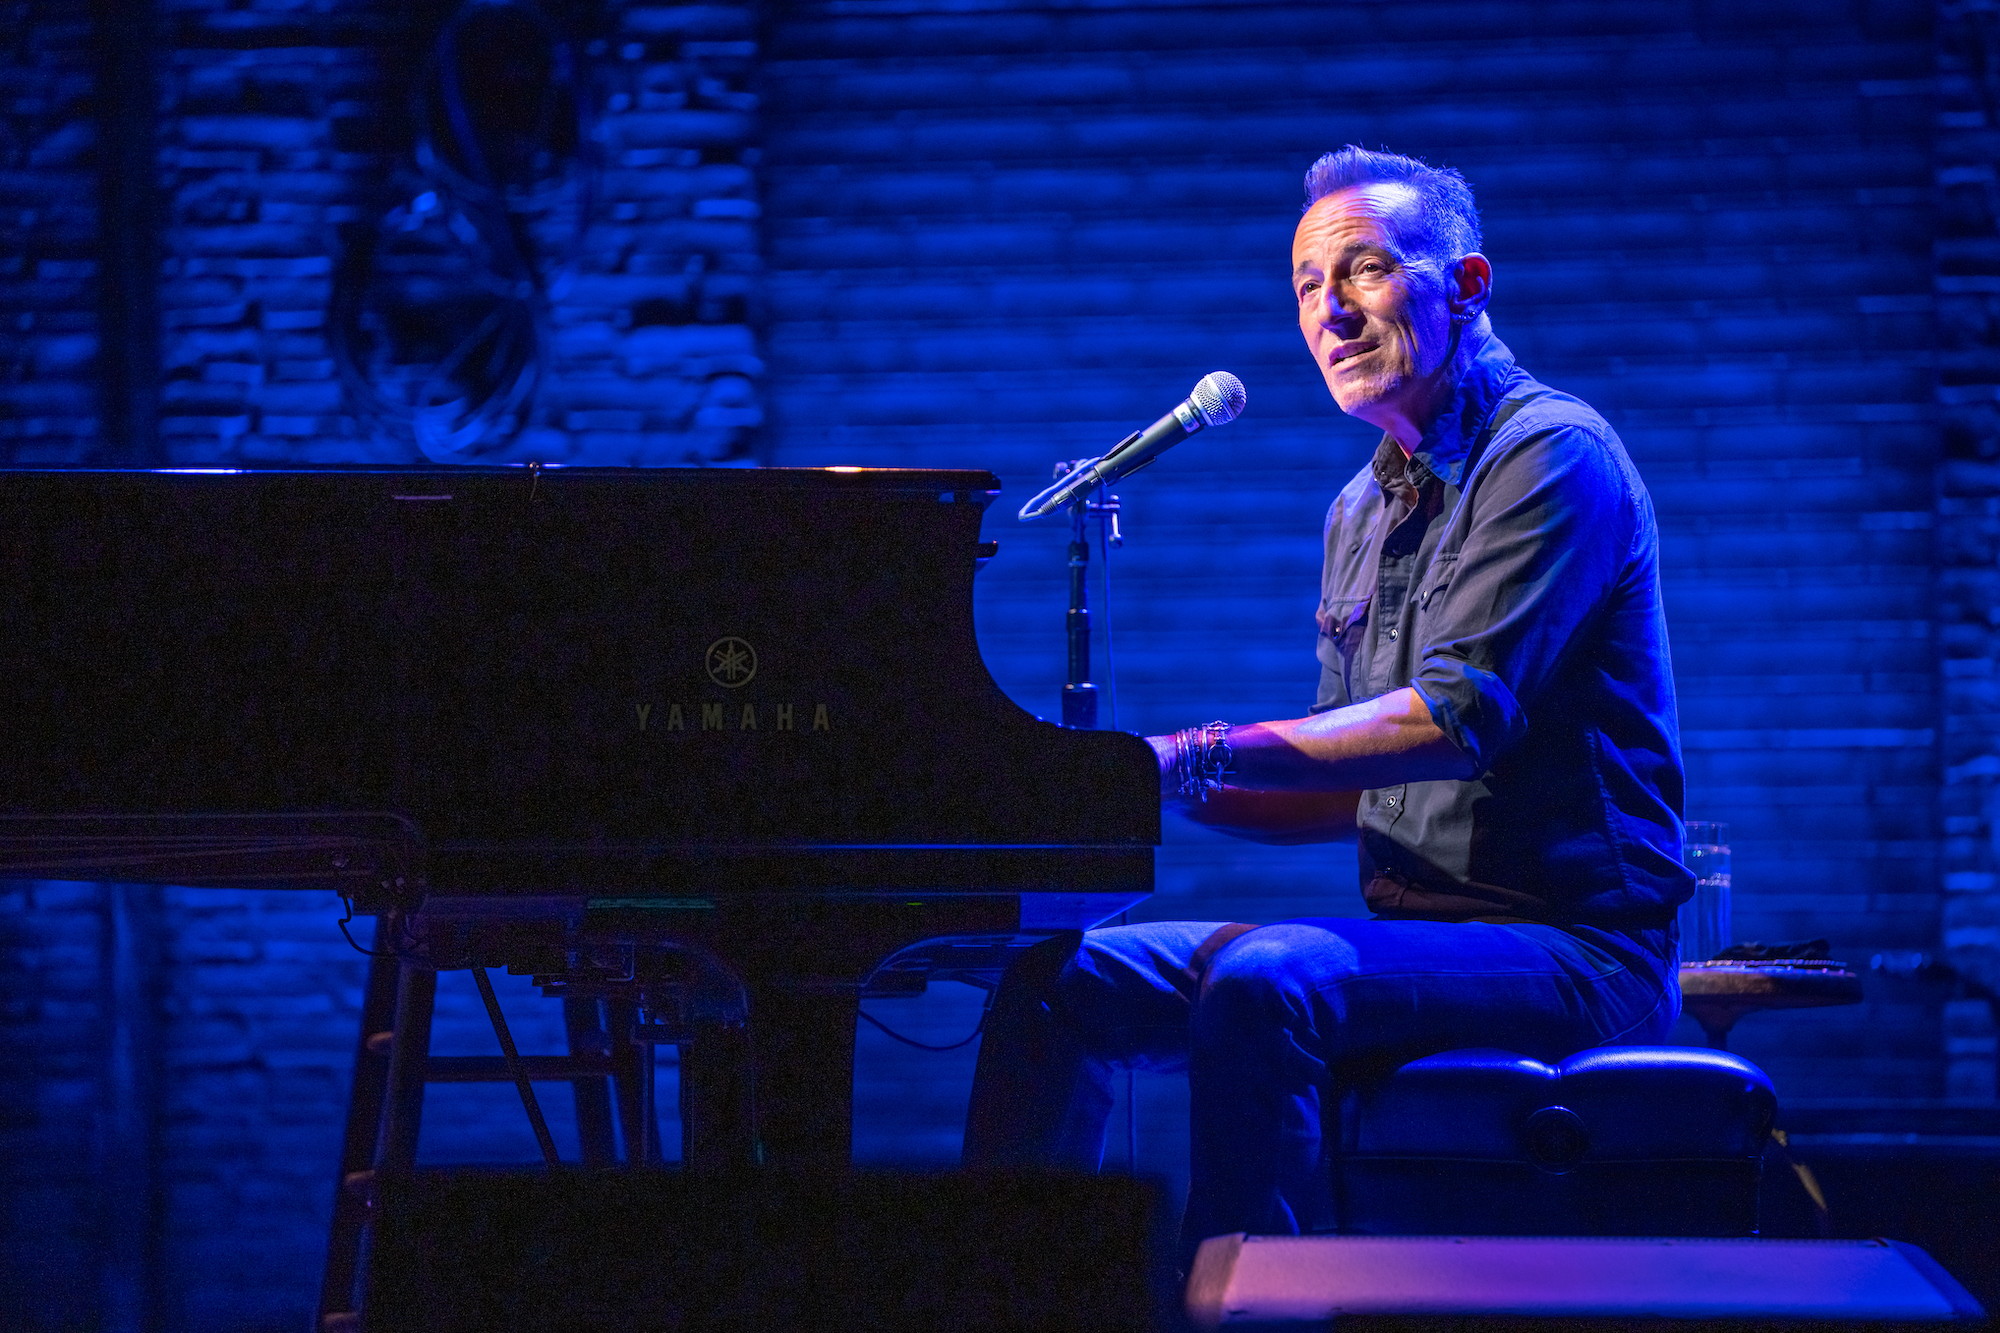 Bruce Springsteen Returns to Broadway With Emotional Performance: ‘It’s a Long Time Coming’